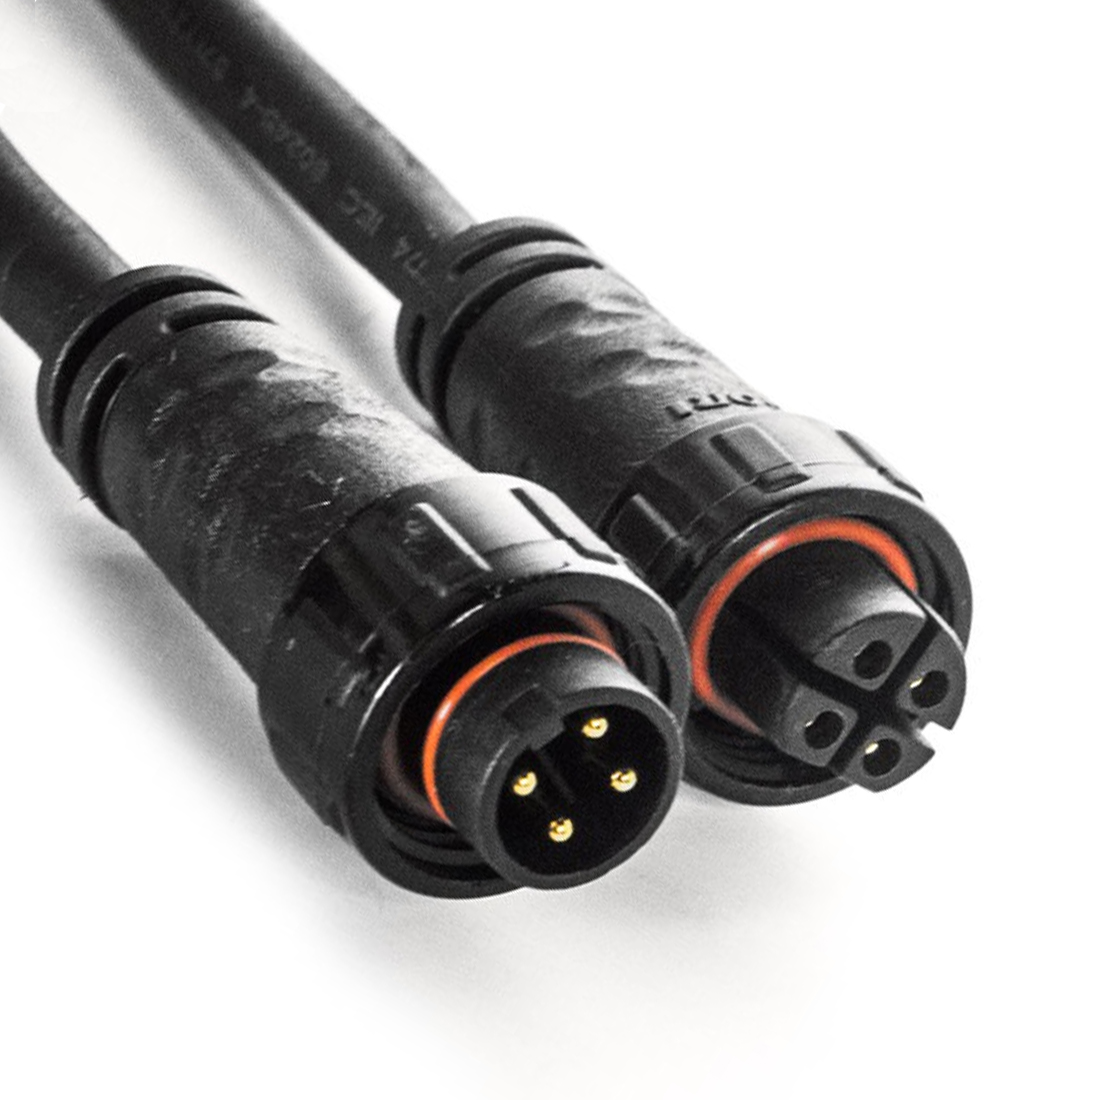 Power IP ext. cable 2m Wifly EXR PAR IP